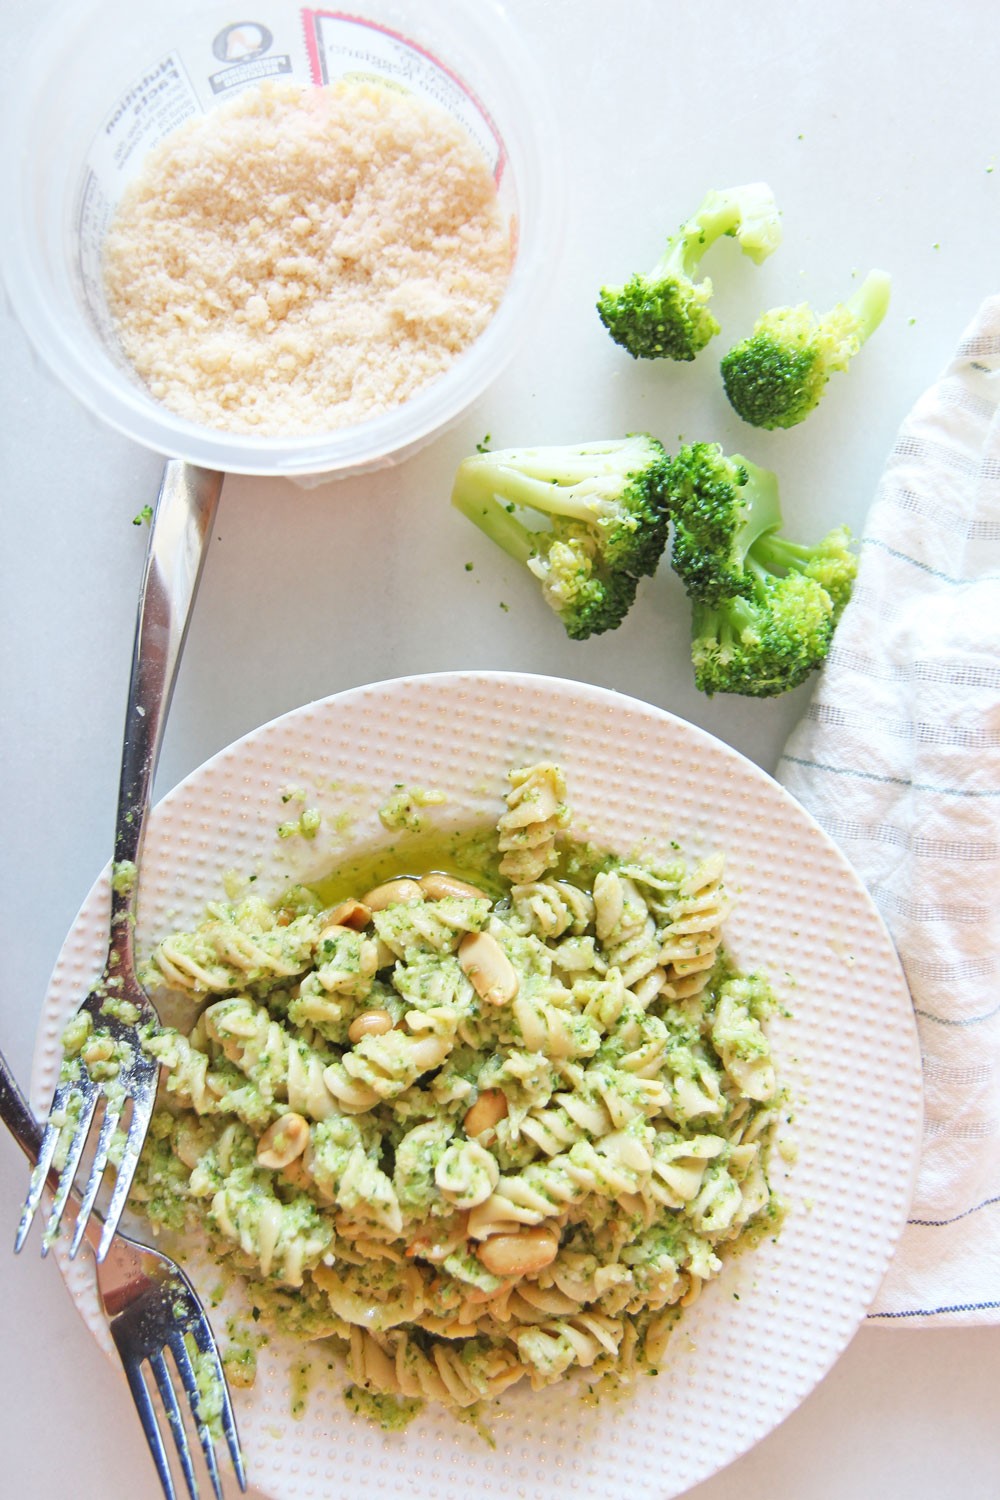 How to Make Broccoli Pesto Recipe. Grab broccoli, arugula, Parmesan, peanuts, and extra virgin olive oil. The secret ingredient is red wine vinegar to brighten it up. This is a 10 minute dinner recipe. Happy Cooking! www.ChopHappy.com #broccoli #pastarecipe